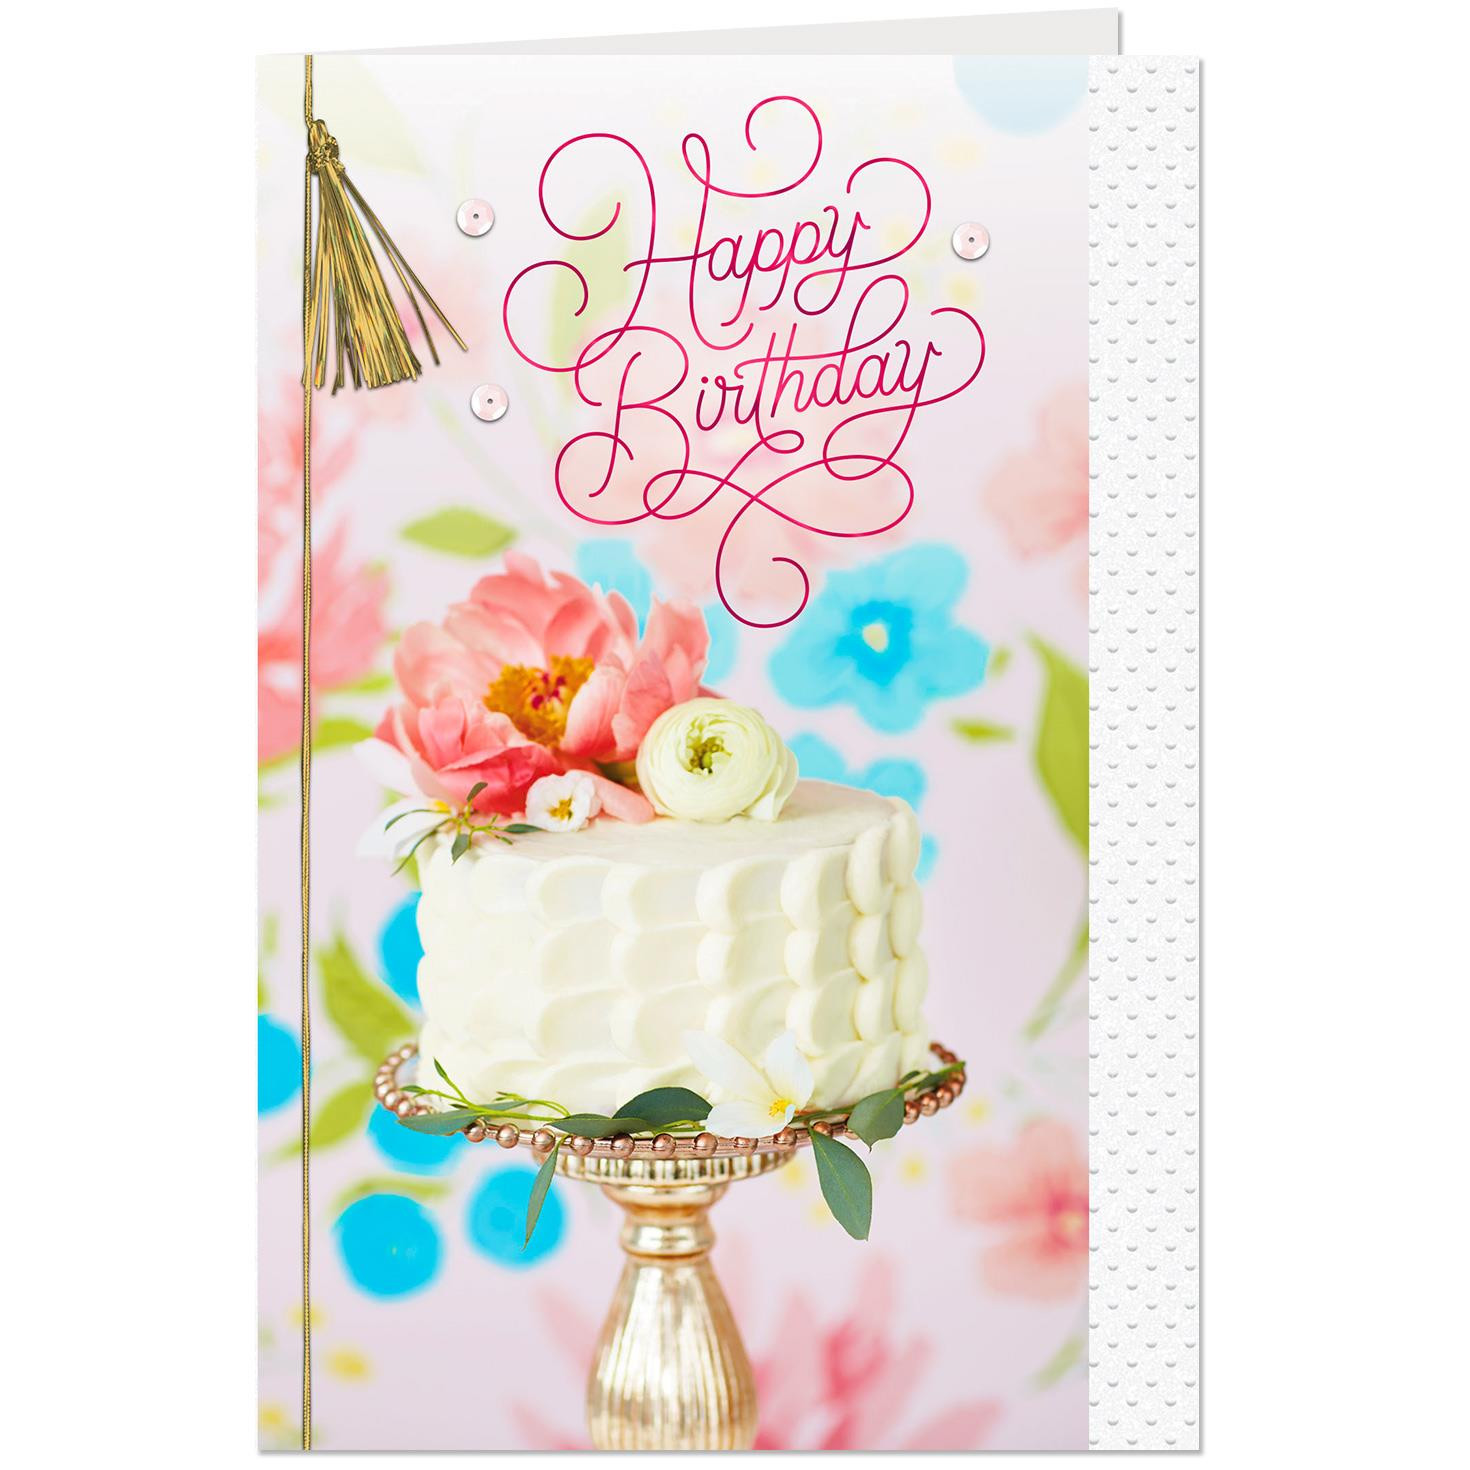 Hallmark Birthday Wishes
 Cake Stand Wishes for Love and Happiness Birthday Card